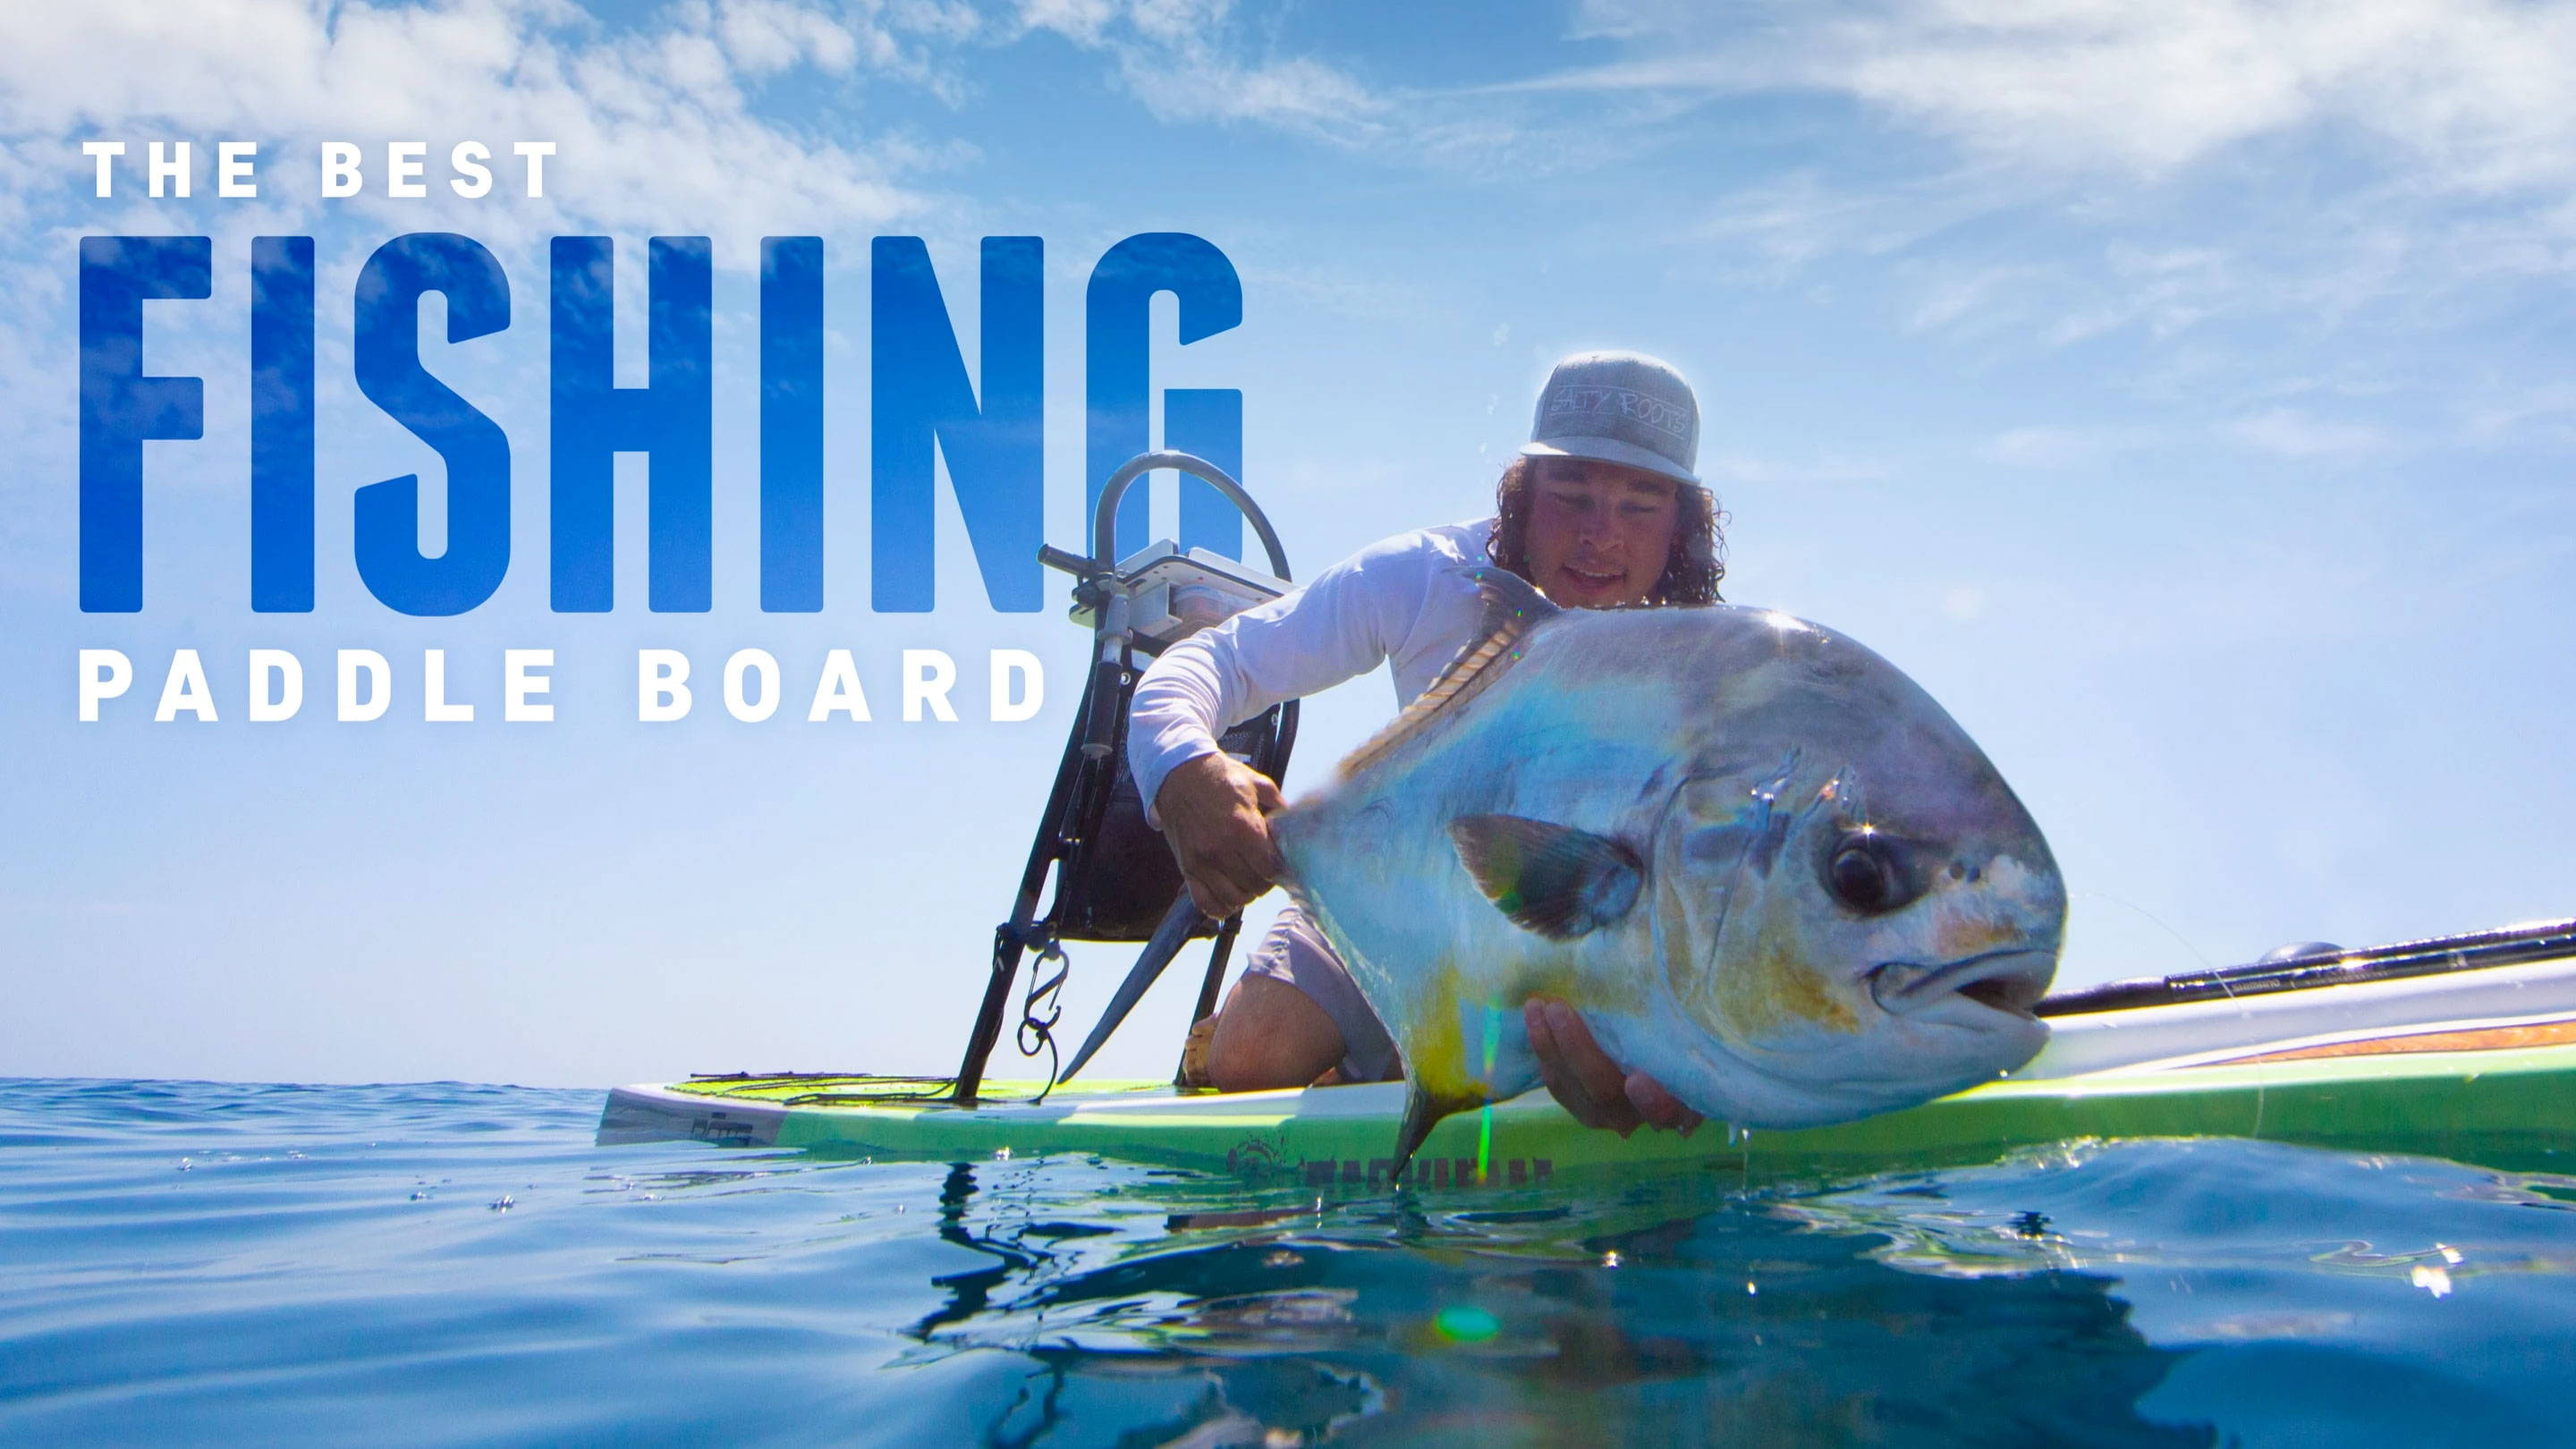 The Best Fishing Paddle Board, Journal